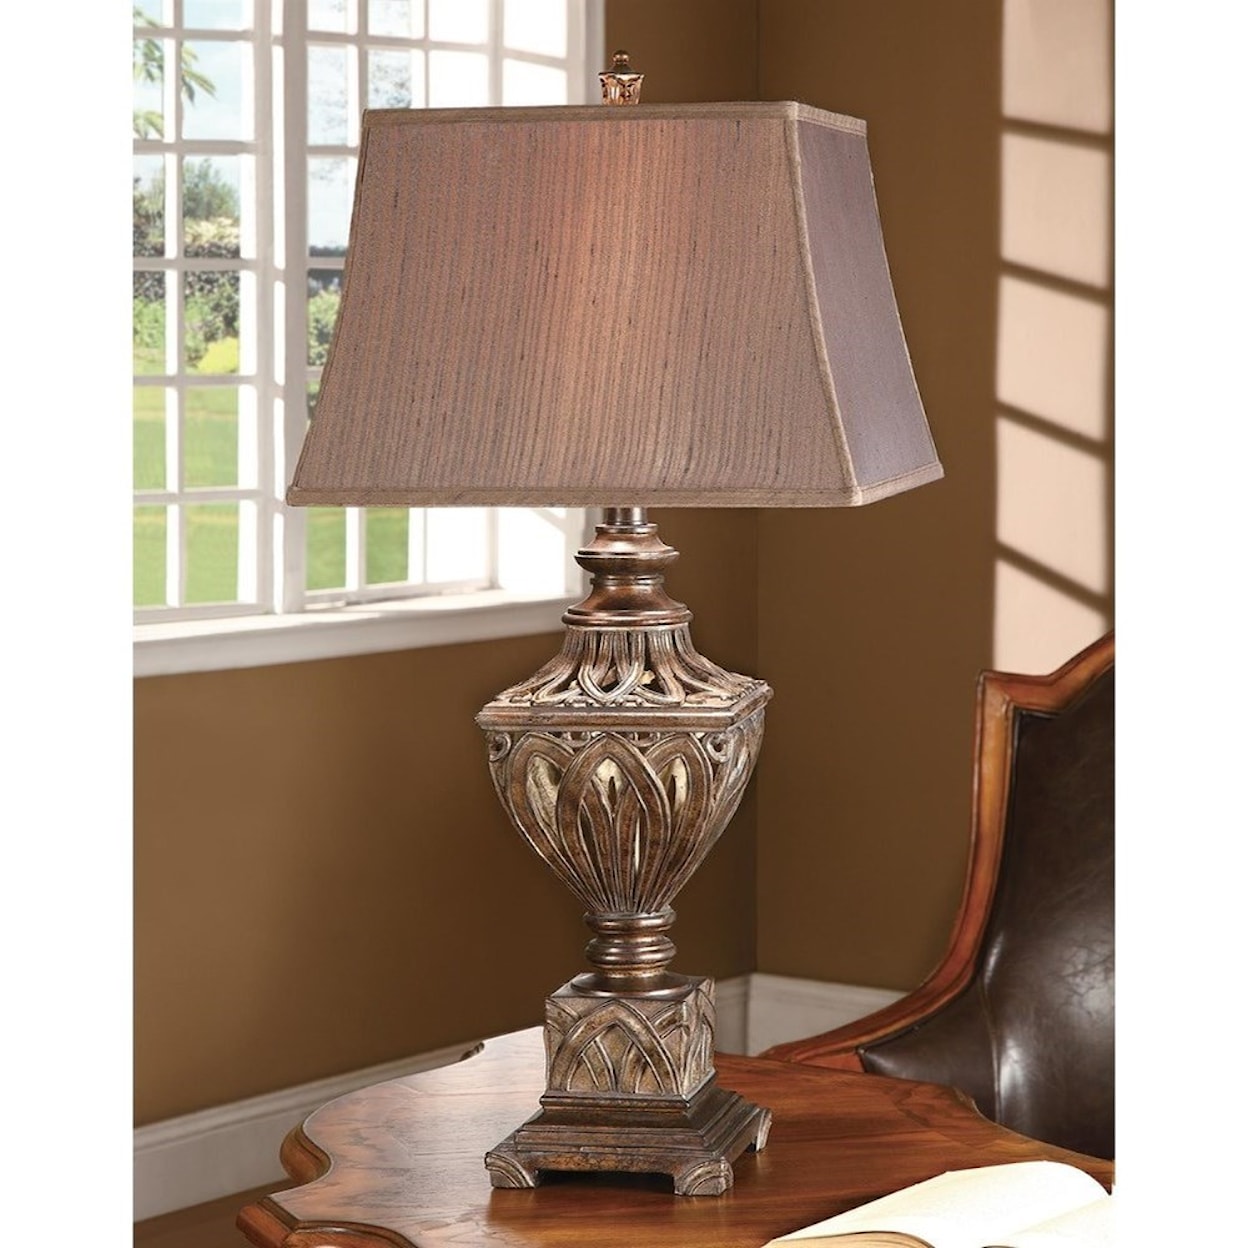 Crestview Collection Lighting Monticello Table Lamp